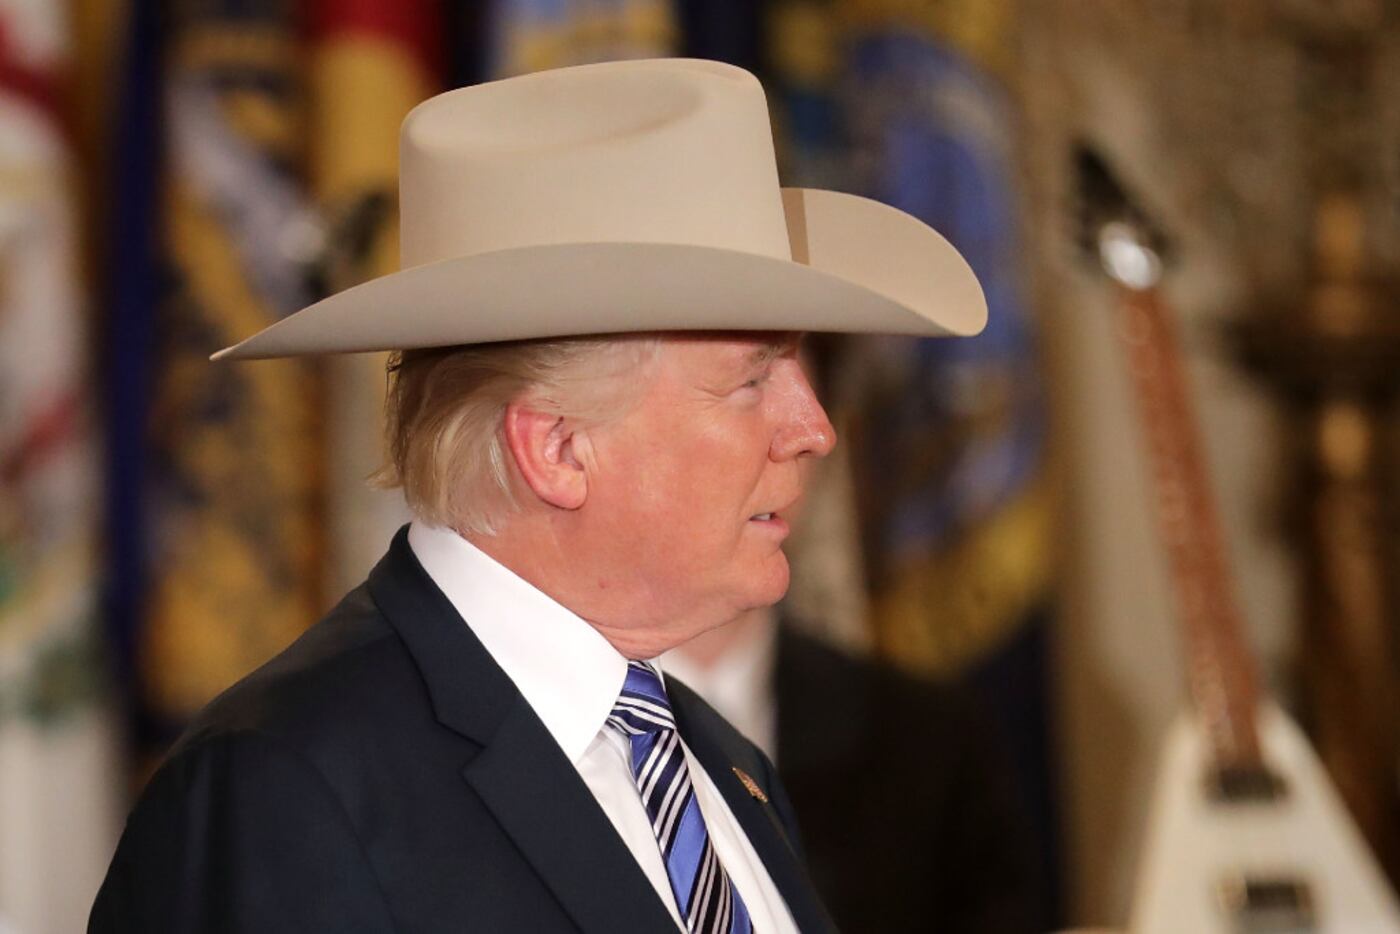 U.S. President Donald Trump wears a Stetson cowboy hat while touring a Made in America...